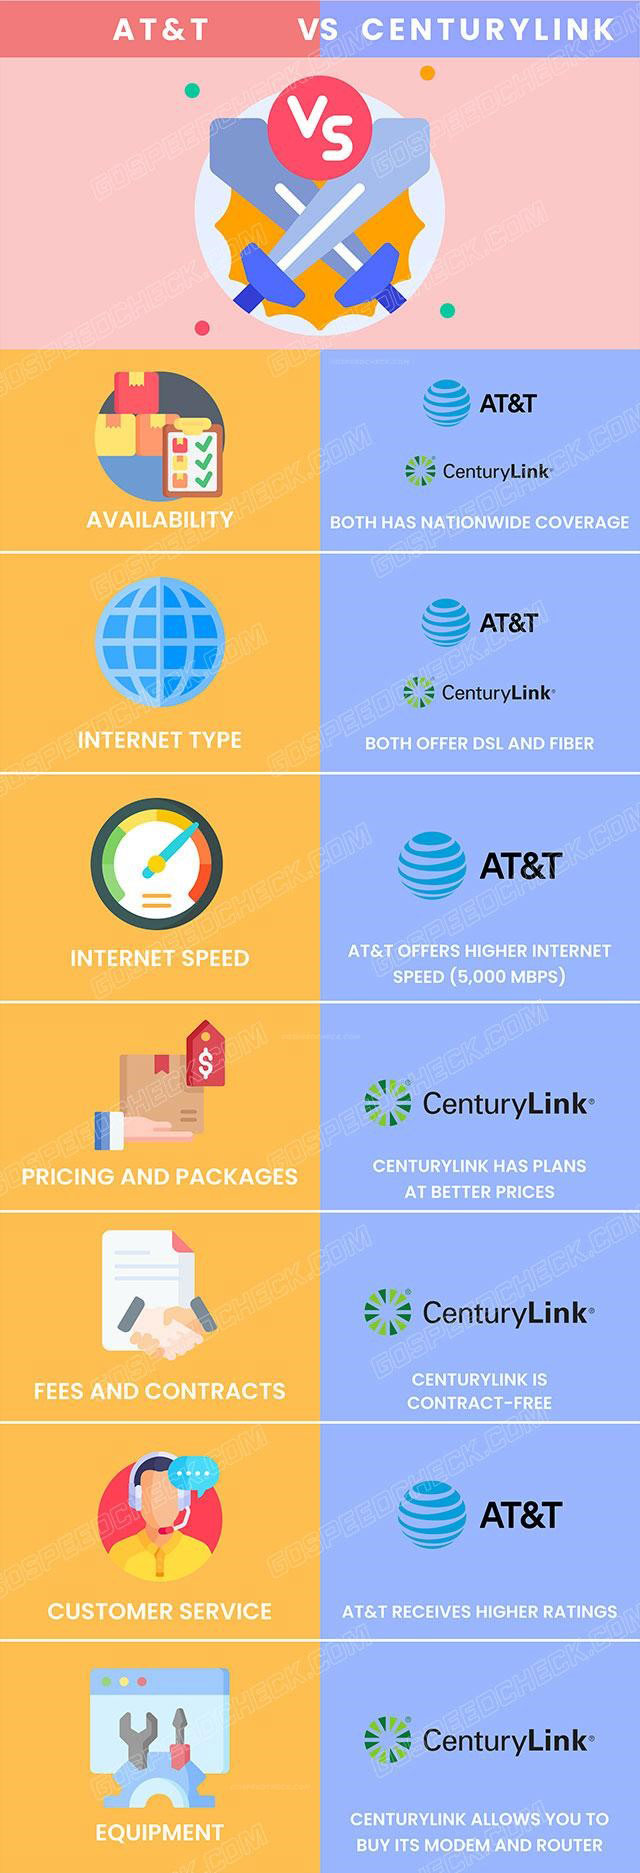 A comparison of CenturyLink and AT&T